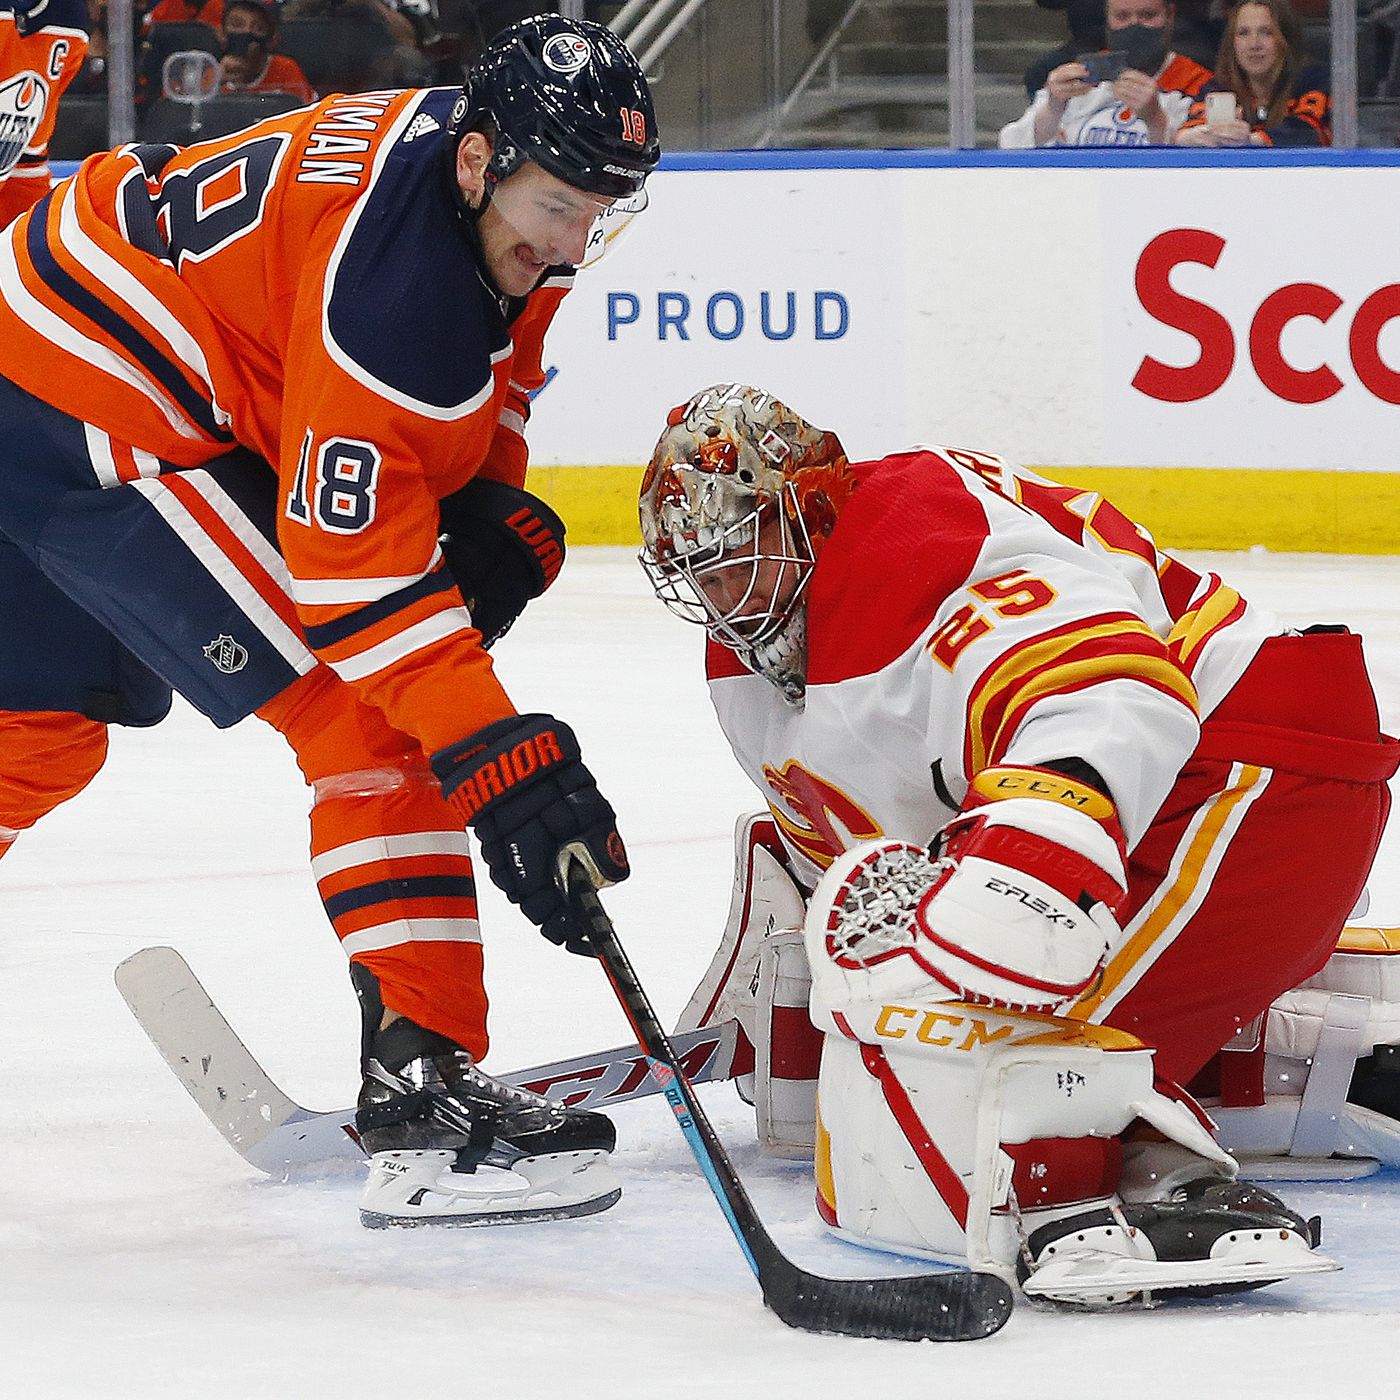 The Morning After Edmonton: Post Game Reaction & Highlights From Calgary's  4-3 Loss To Edmonton - Matchsticks and Gasoline